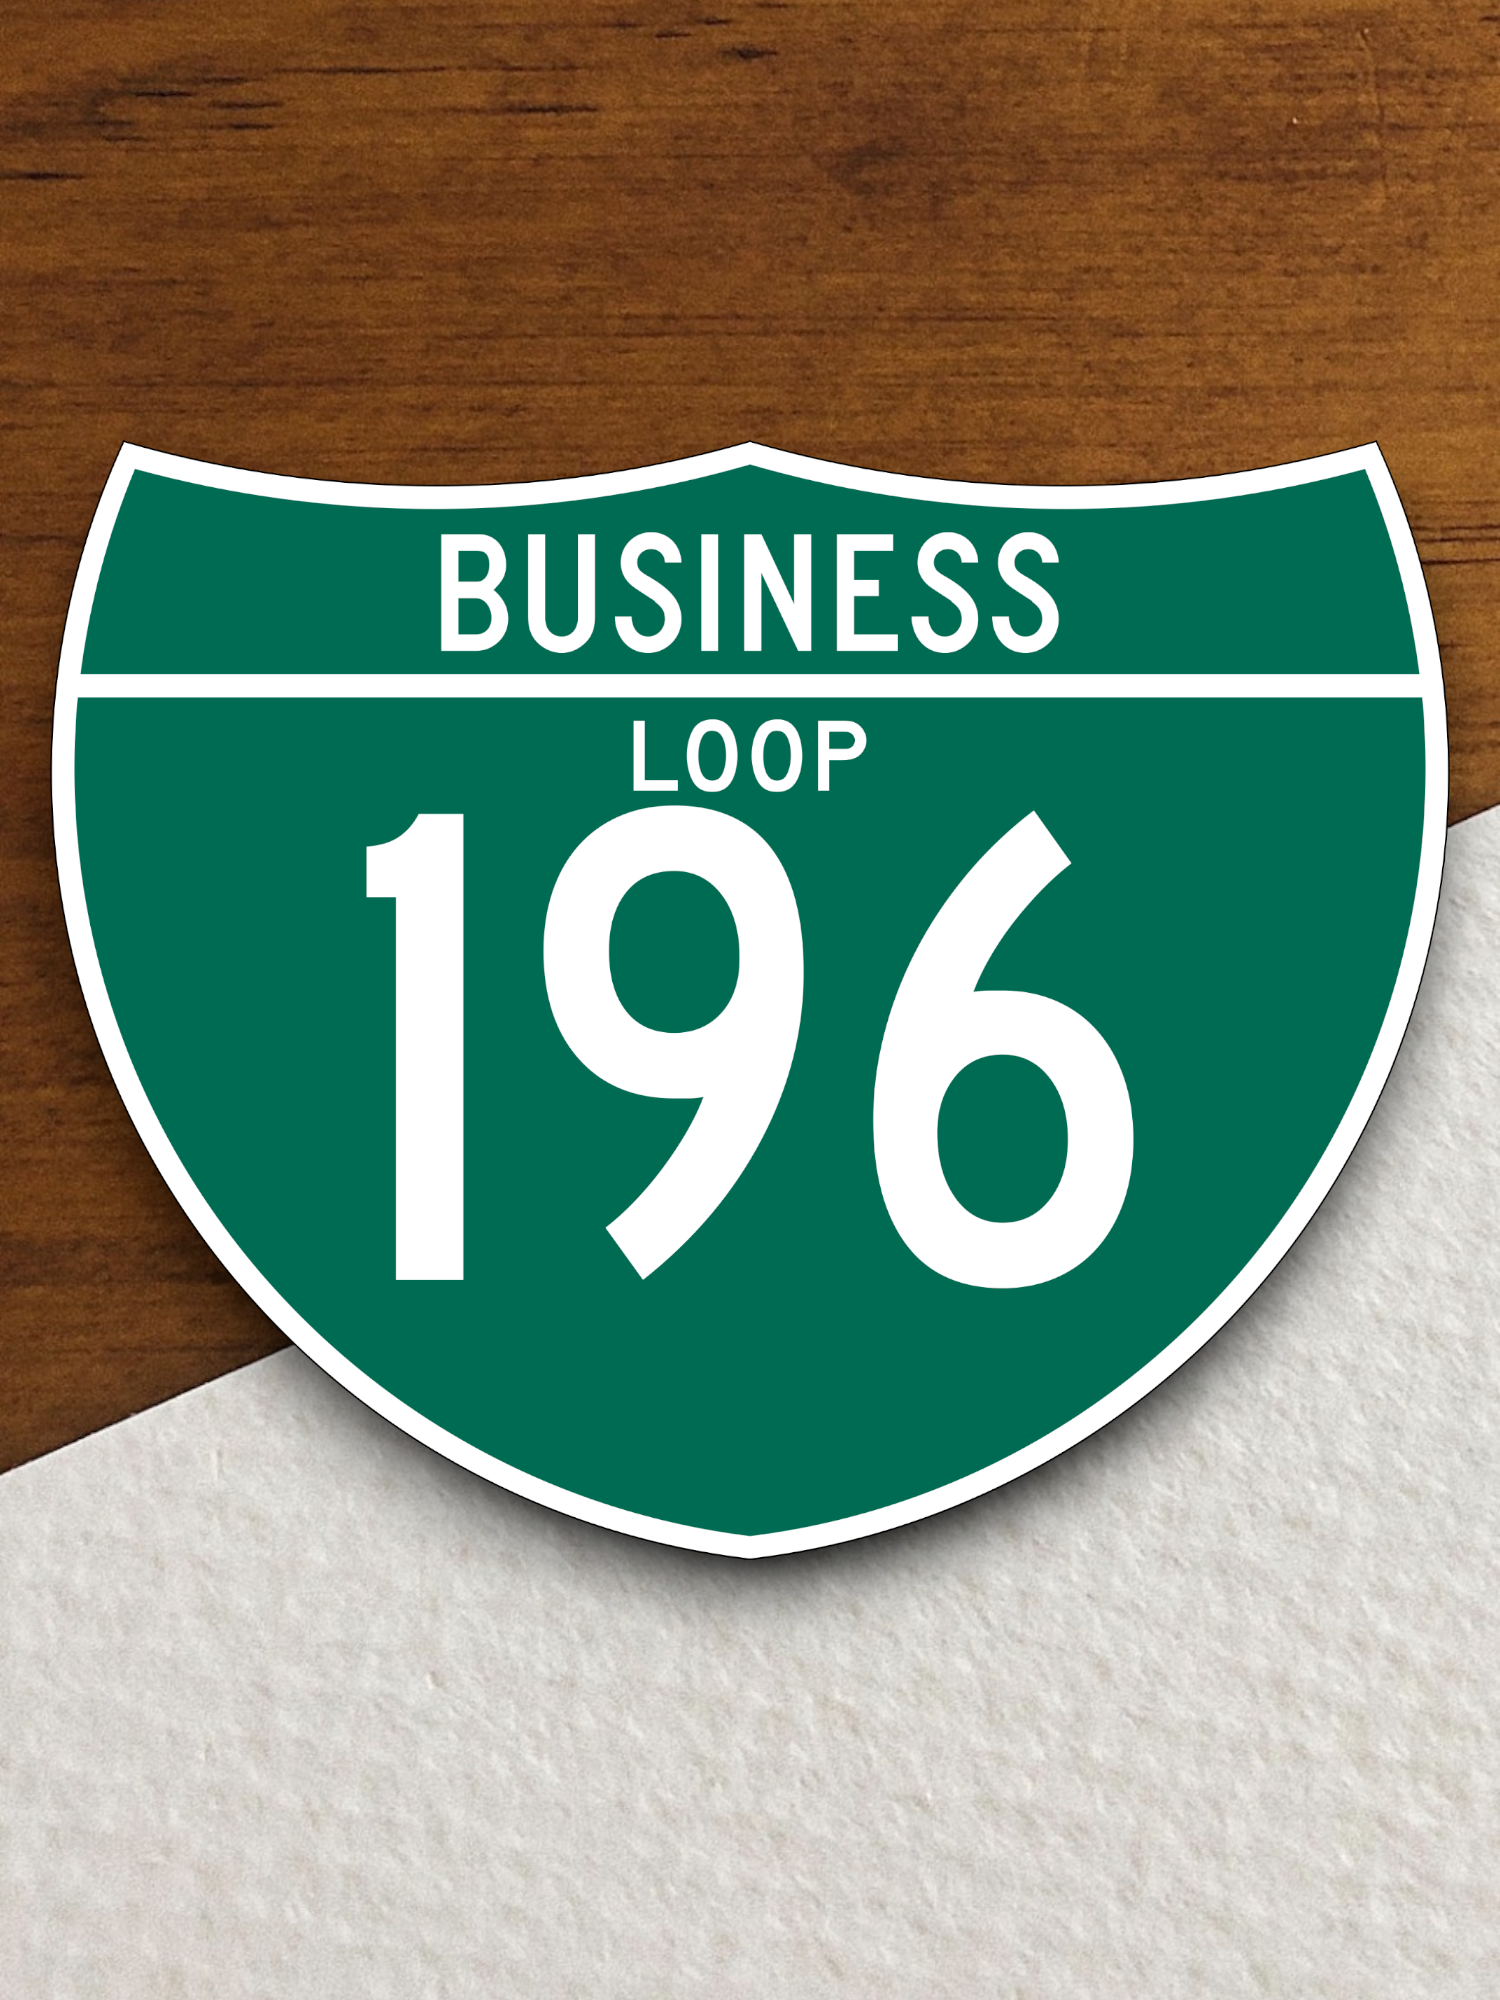 Business Loop 196 Road Sign Sticker